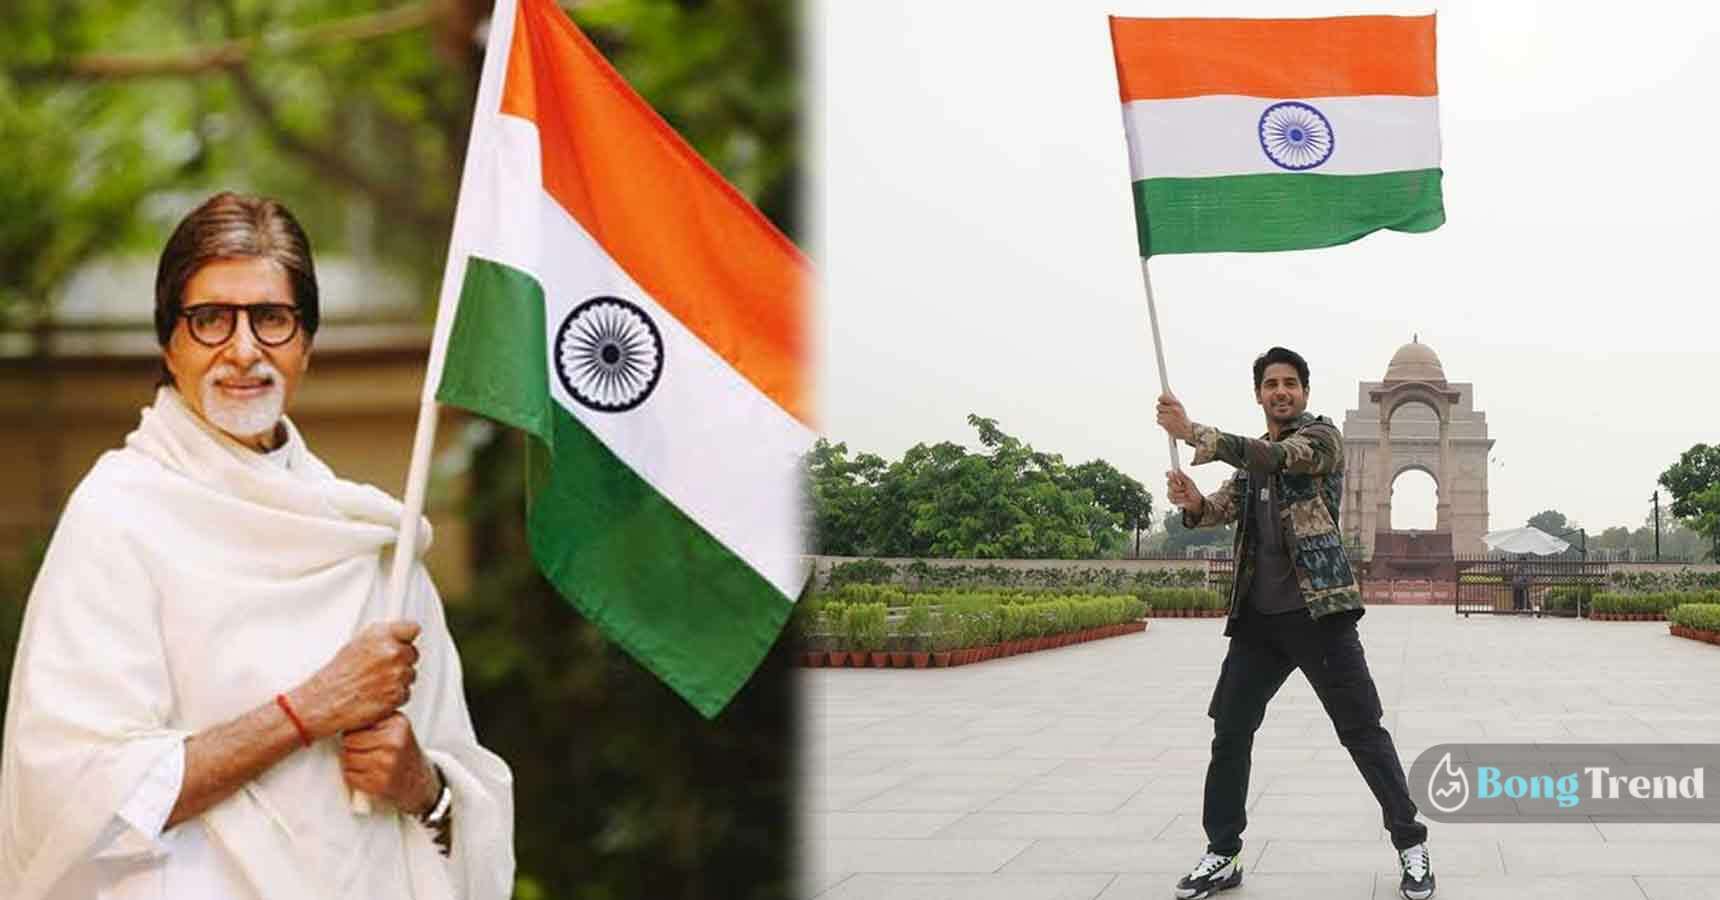 Bollywood Celebrities wishes happy 75th Inpendence Day,Independence Day,স্বাধীনতা দিবস,Amitabh Bacchan,Sonu Sood,Shershah,Sidharth Malhotra,Akshay Kumar,75th Independence Day